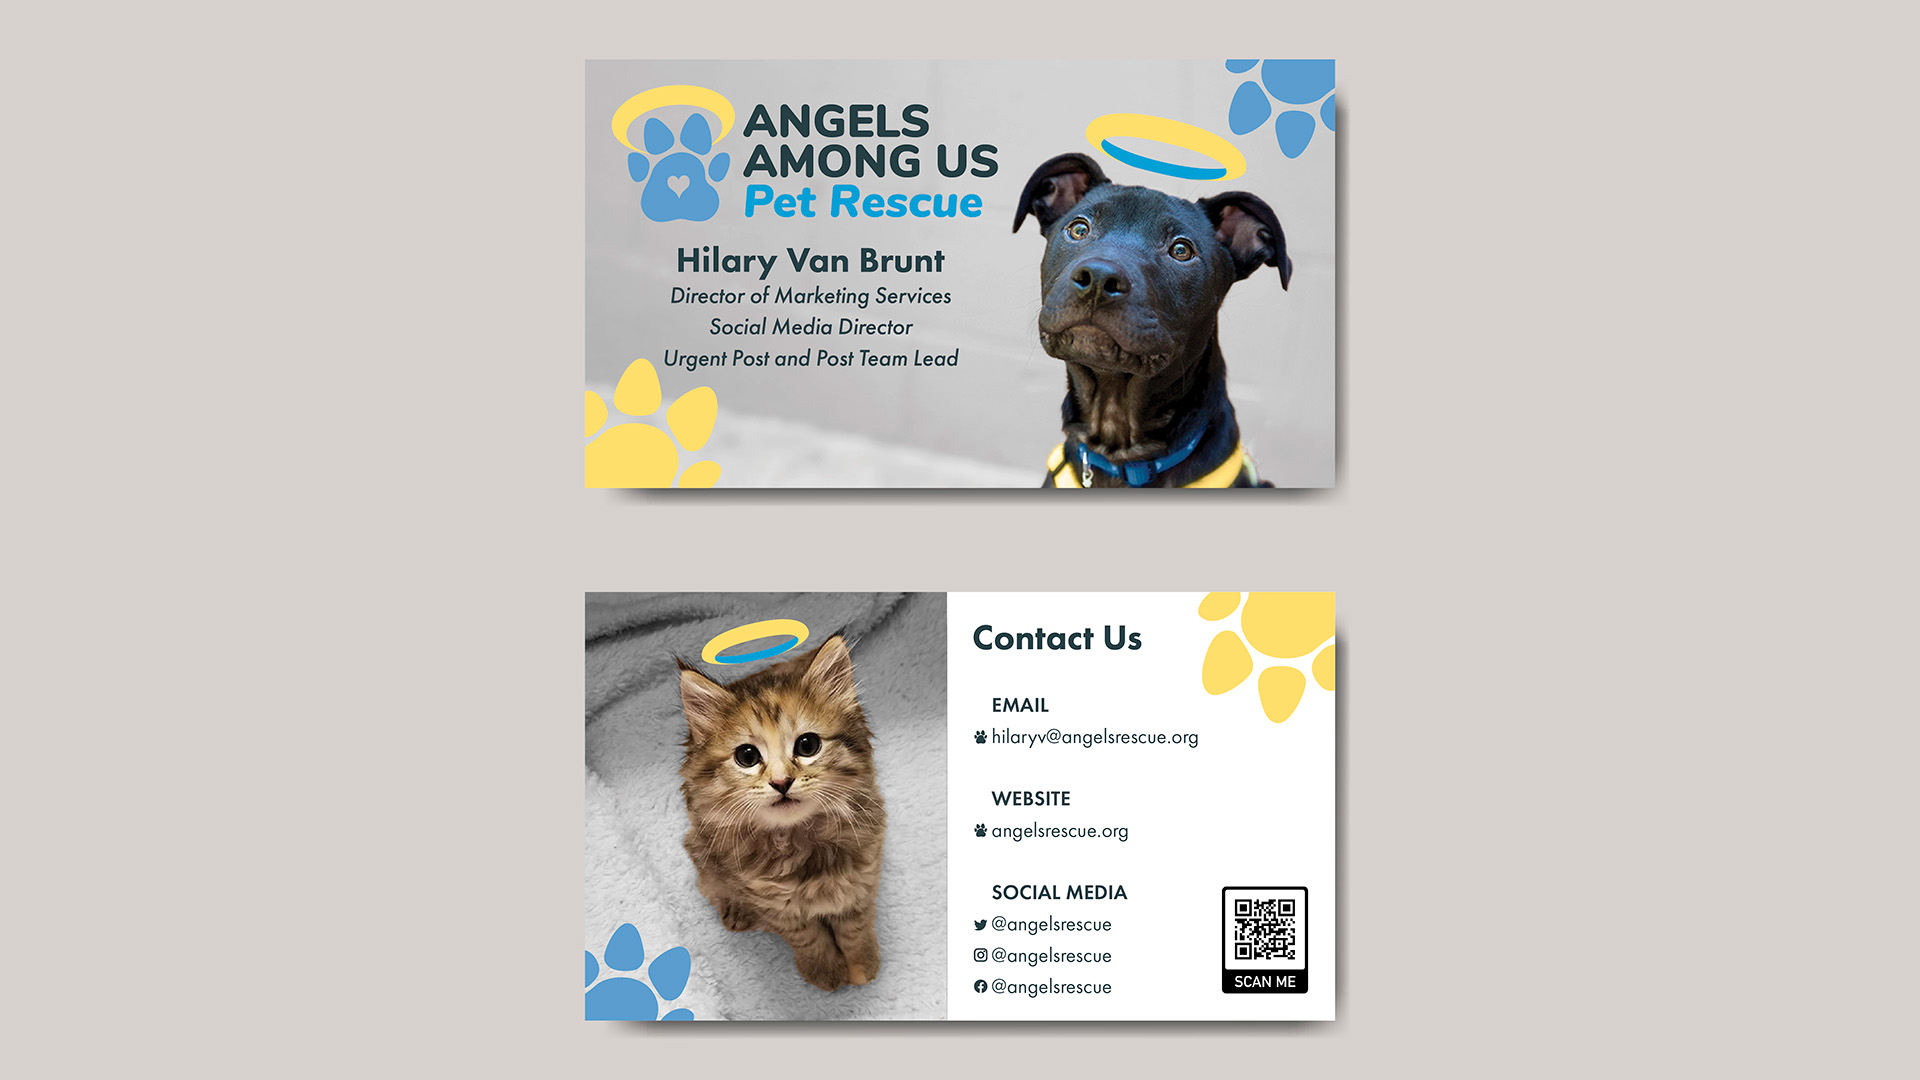 Angels Among Us Business Cards / “Angels Among Us Business Cards,” professional business cards, 2 x 3.5 inches print business card, 2022. This business card was designed to reflect the new branding for the nonprofit organization, Angels Among Us.